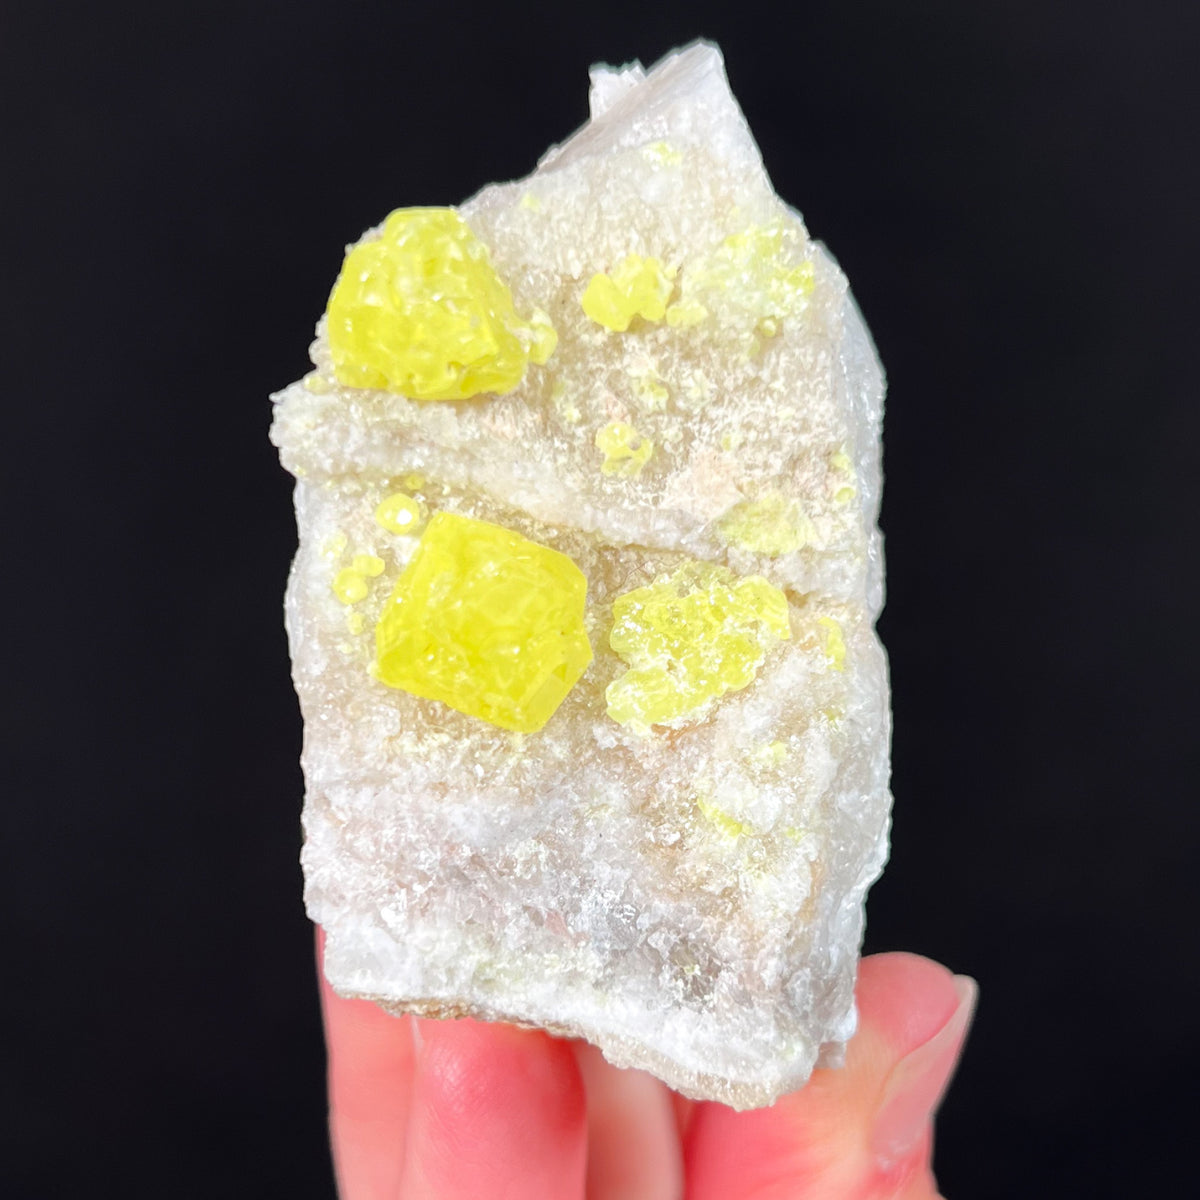 Large sulfur crystals